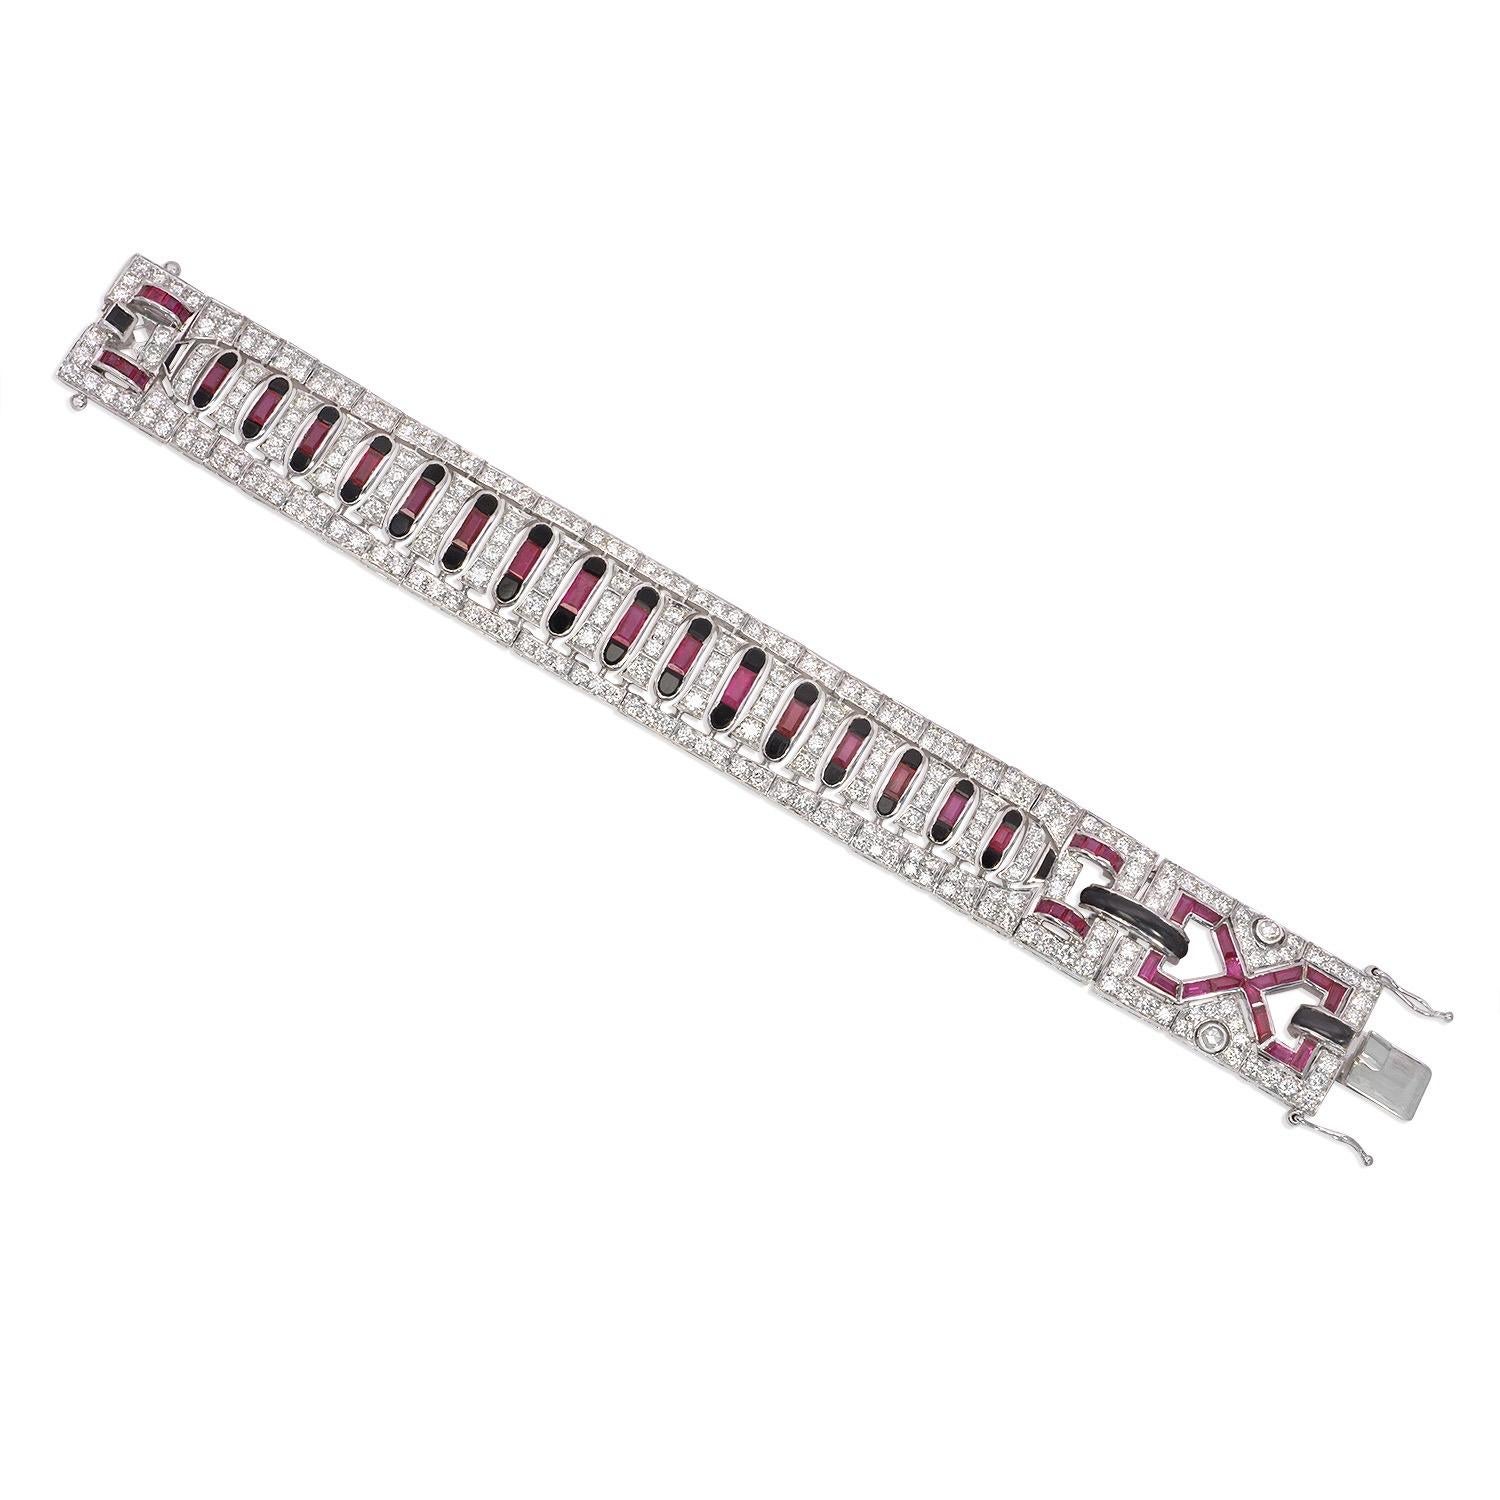 Designed as an openwork geometric strap set with ruby, onyx and diamond, this art deco style bracelet featuring 6.9 carats of G VS2 round brilliant diamonds and 9 carats of natural rubies.

Round Diamond

Shape	Round